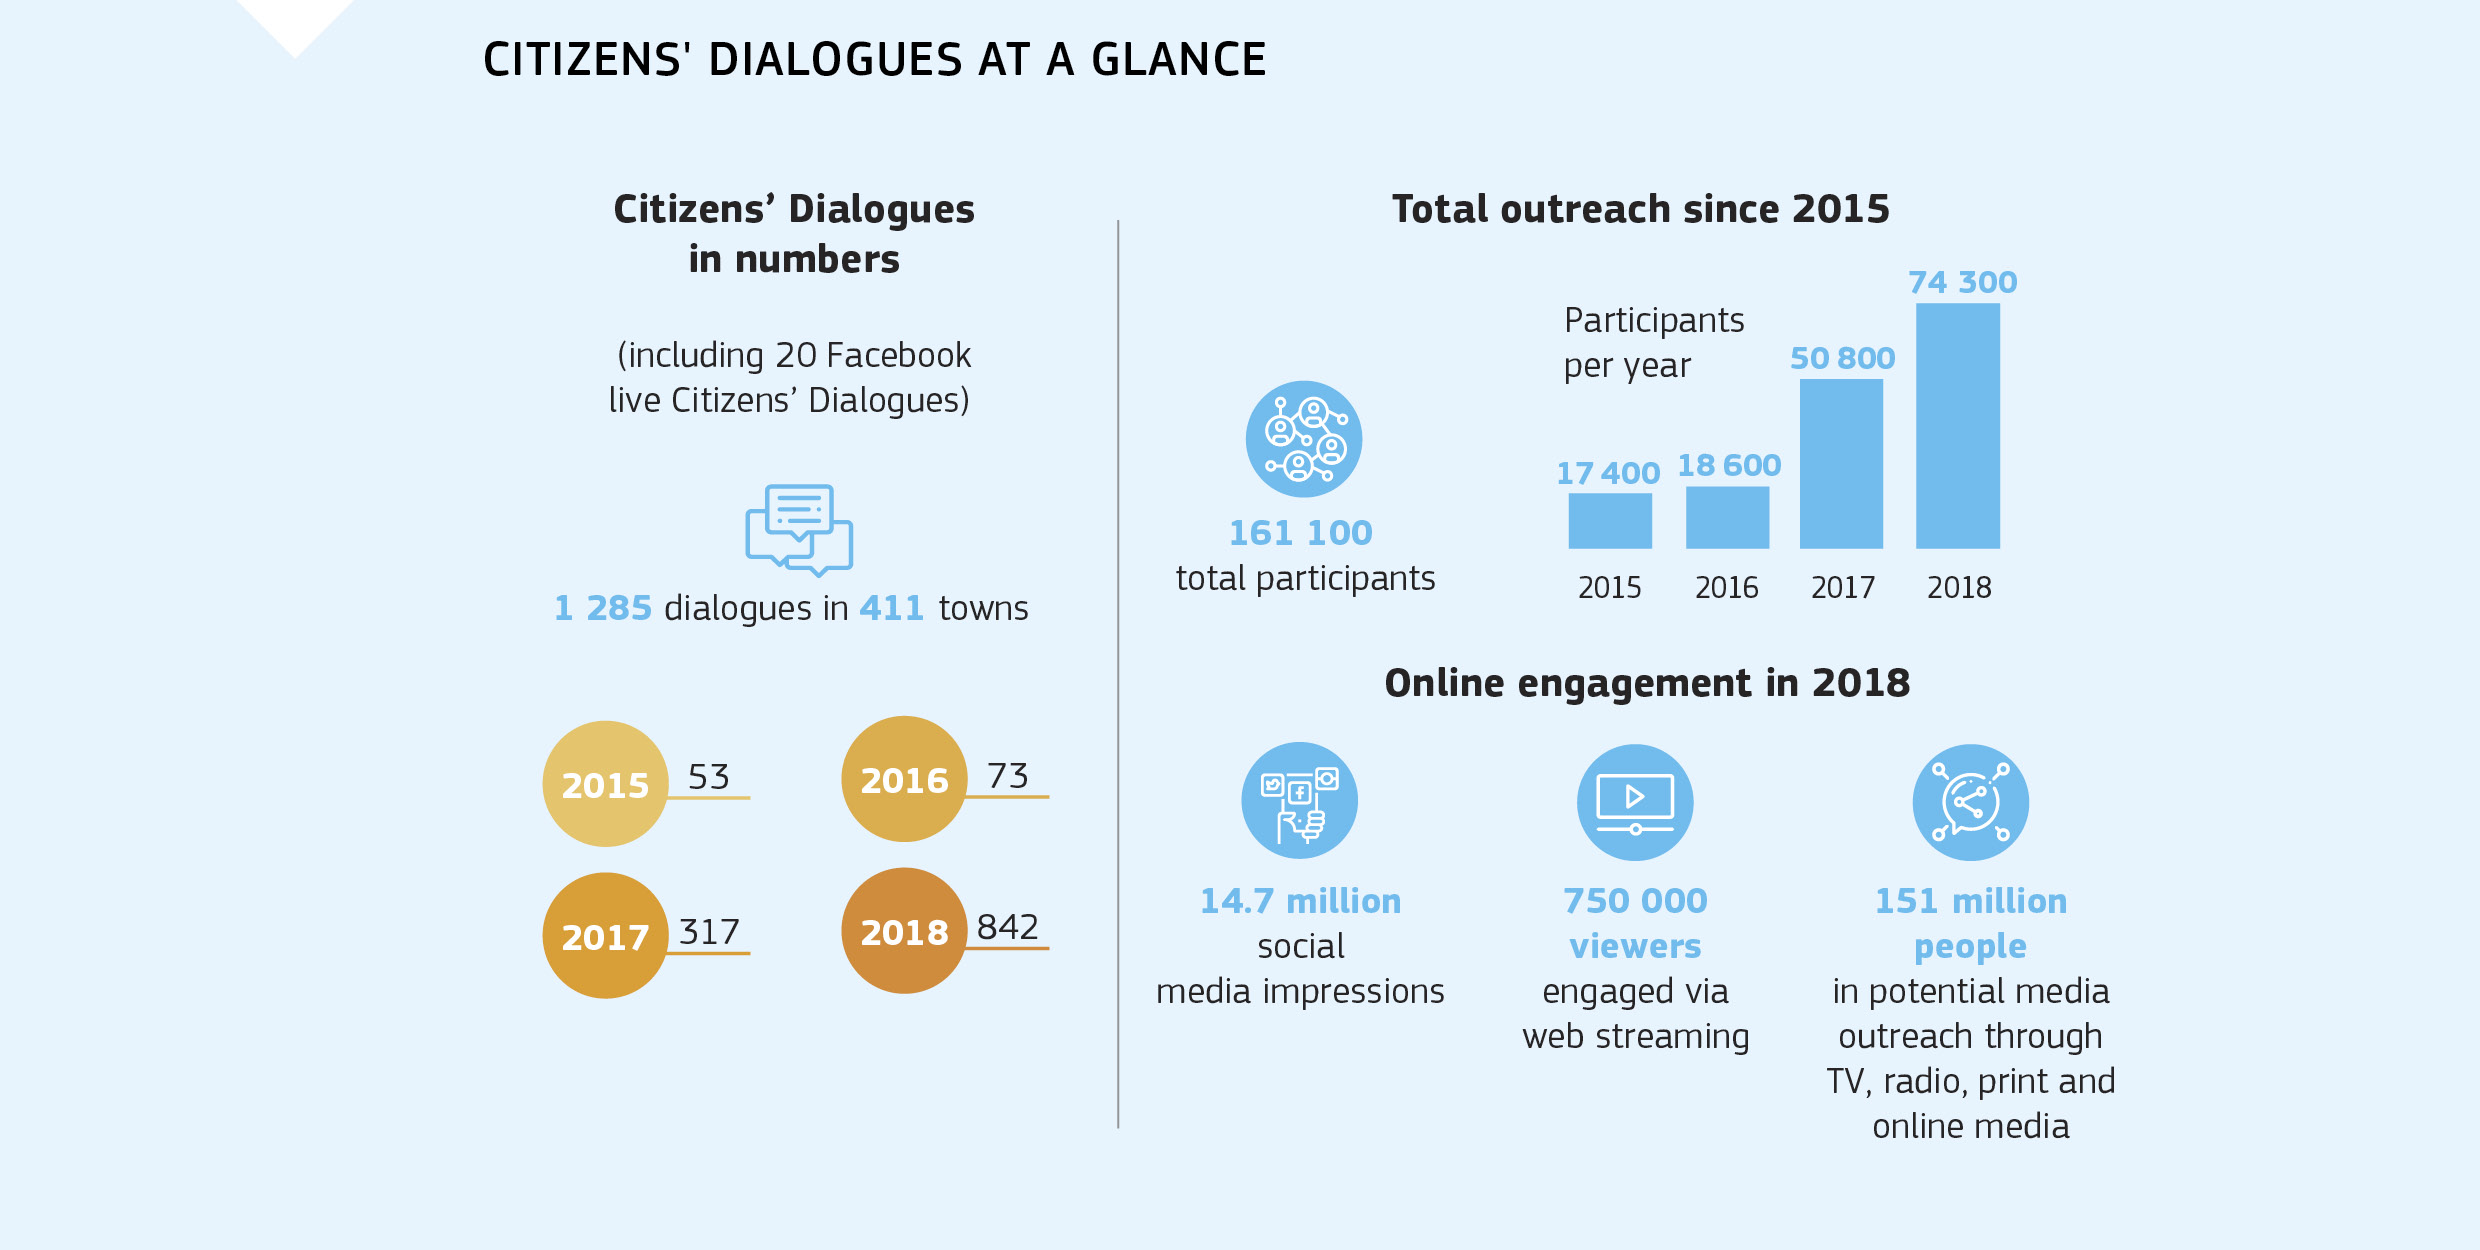 CITIZENS' DIALOGUES AT A GLANCE